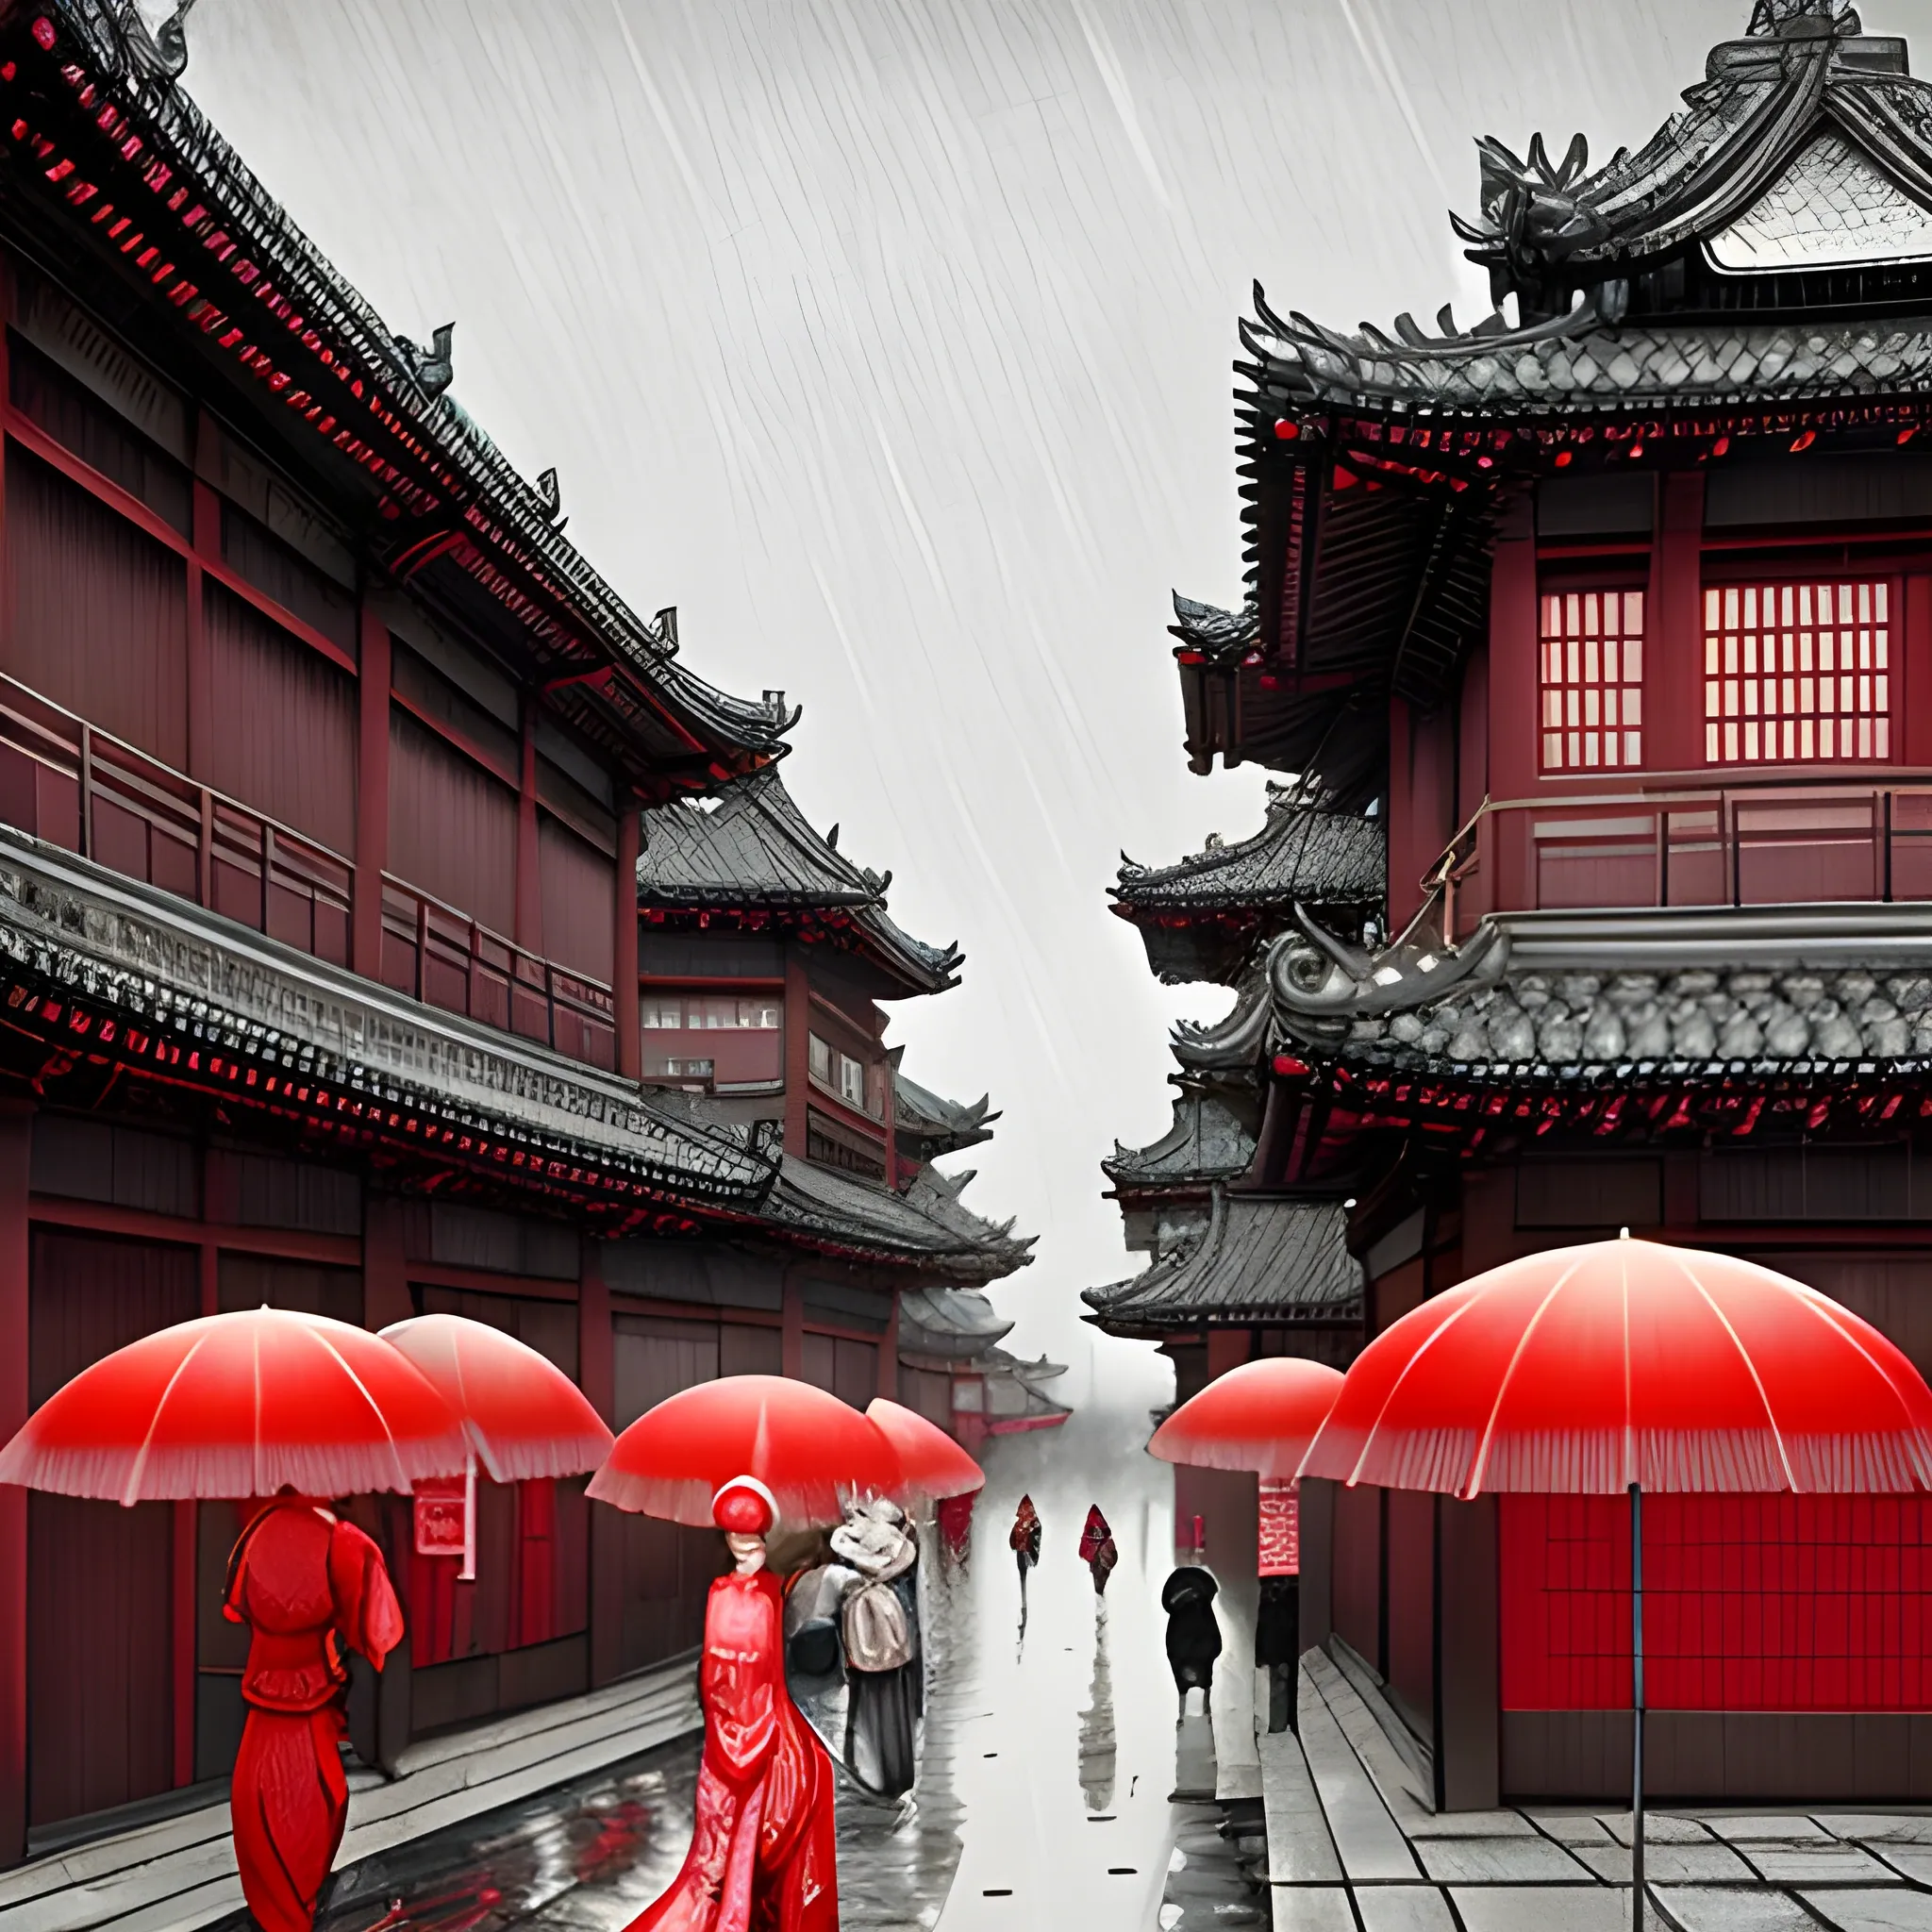 ancient Tang dynasty, metropolitan art style, bazaar, classical realism, surreal anime, cityscape, mysticism, gray tones and red, raindrops, cloudy sky